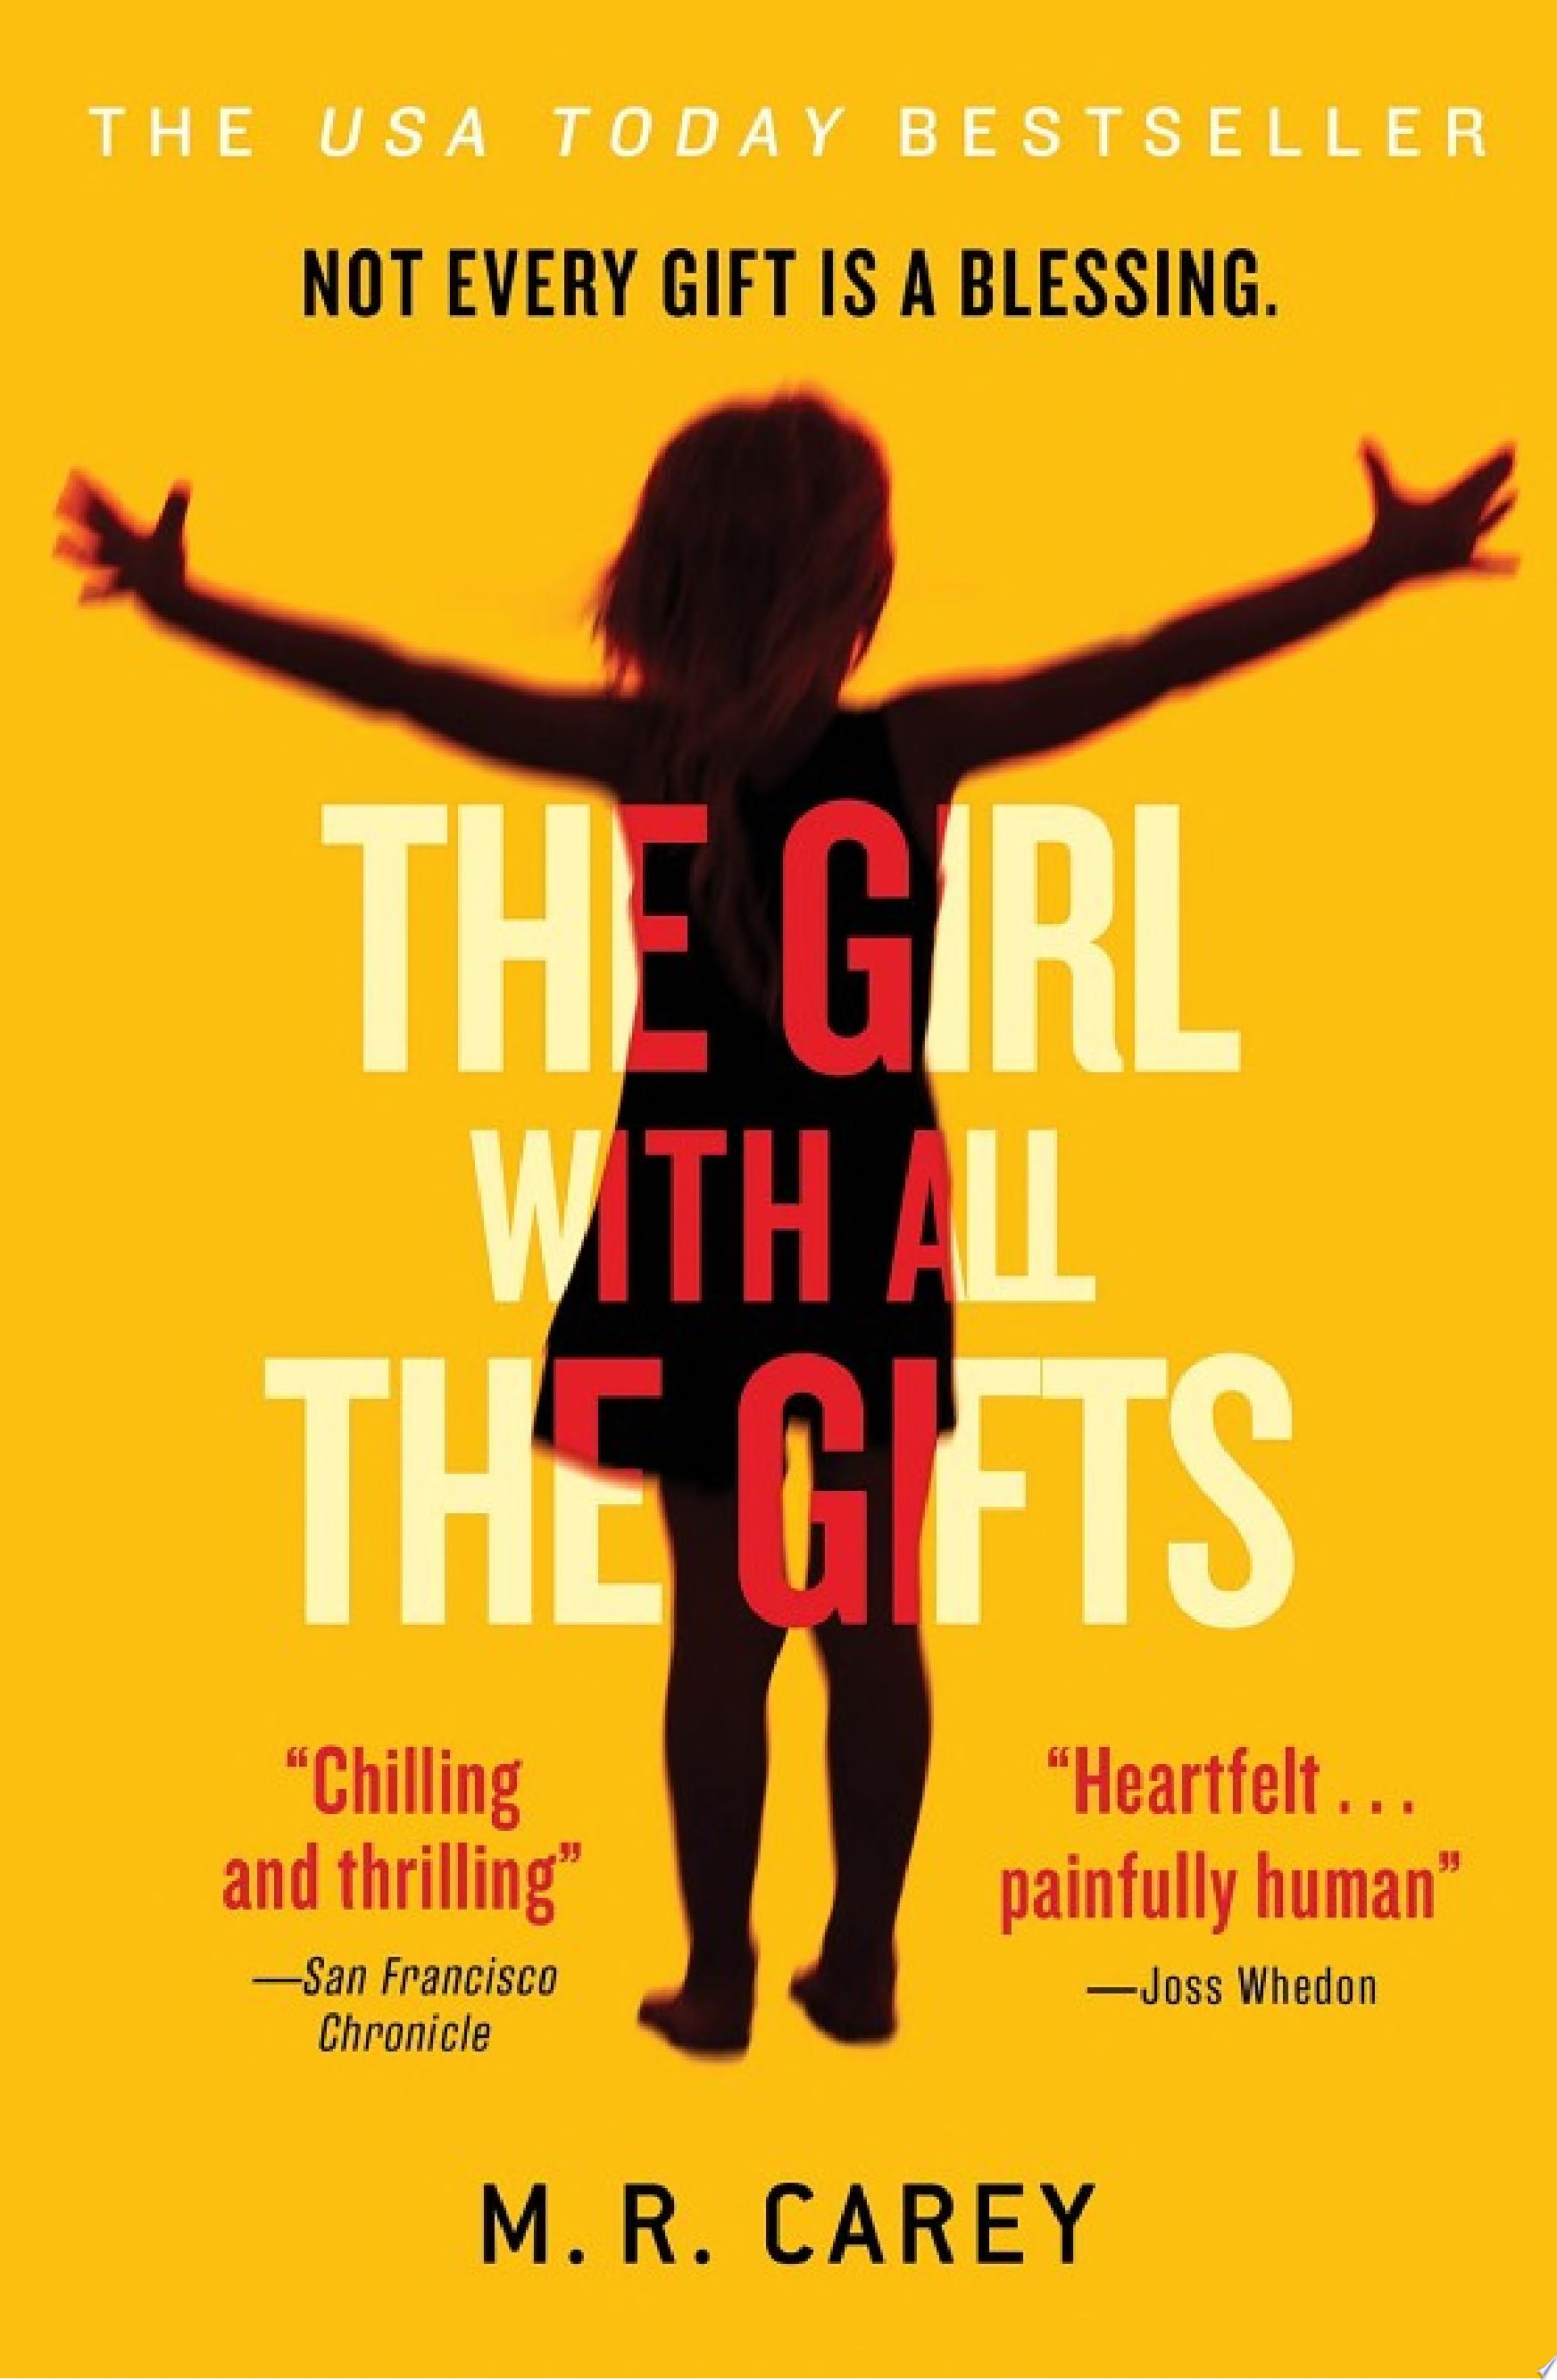 Image for "The Girl With All the Gifts"